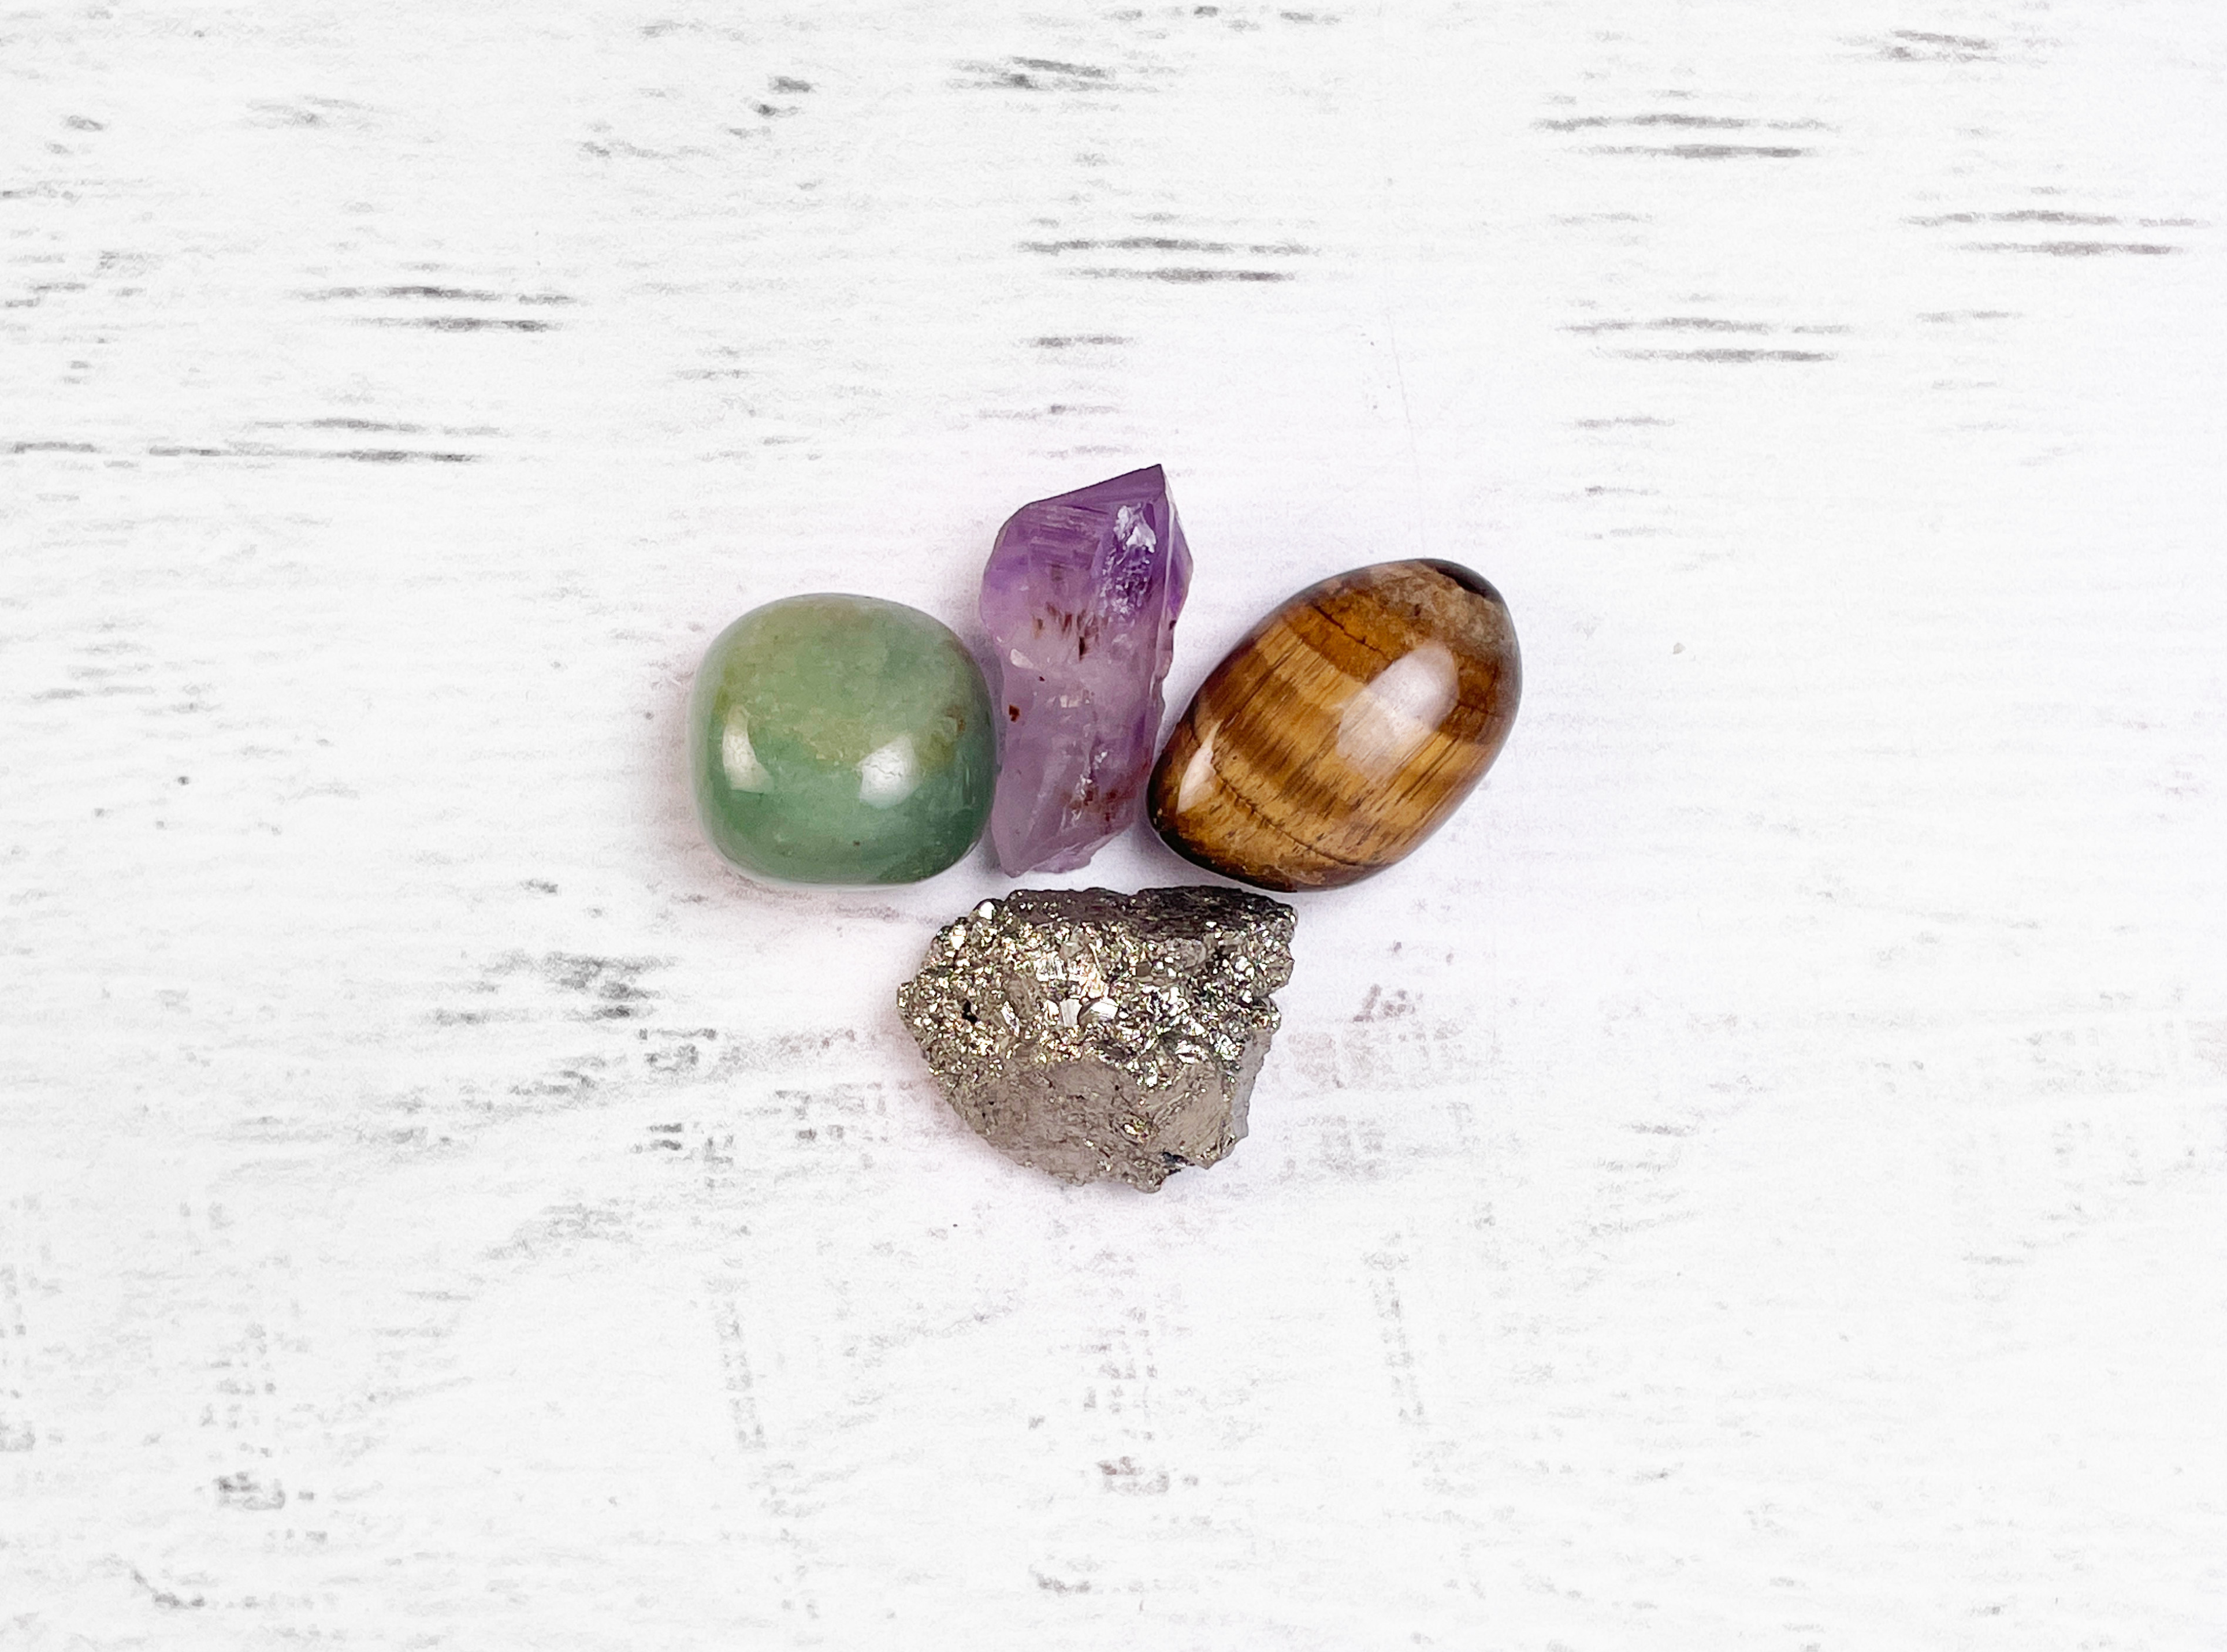 Buy Online Latest and Unique Addiction Recovery / Sobriety Crystals Pocket Bundle | Shop Best Spiritual Items - The Mystical Ritual